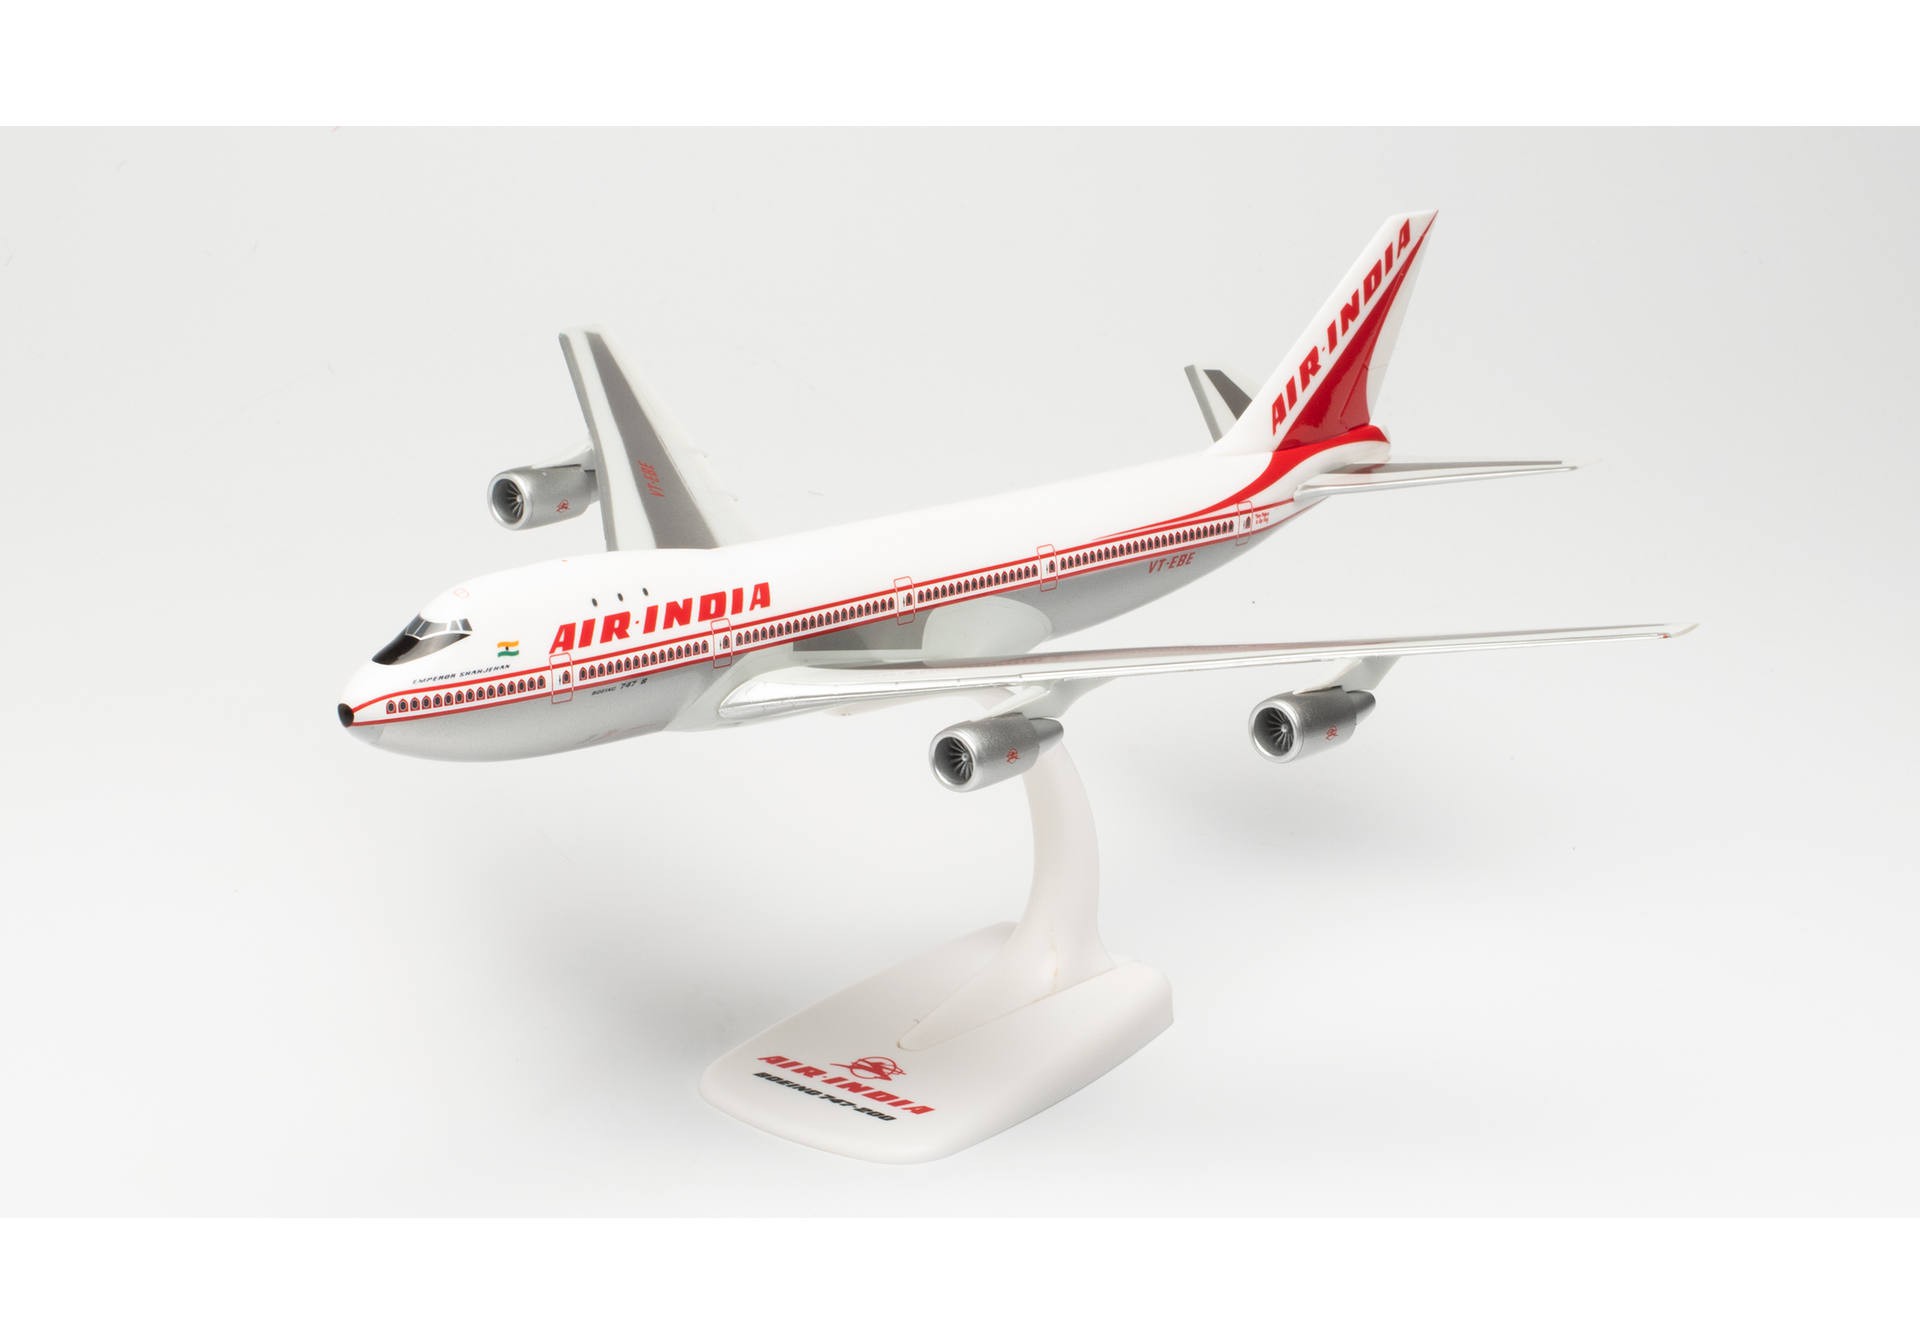 Herpa Wings 613378 Air India Boeing B747-200 VT-EBE “Emperor Shahjehan” Aircraft-Model 1:250